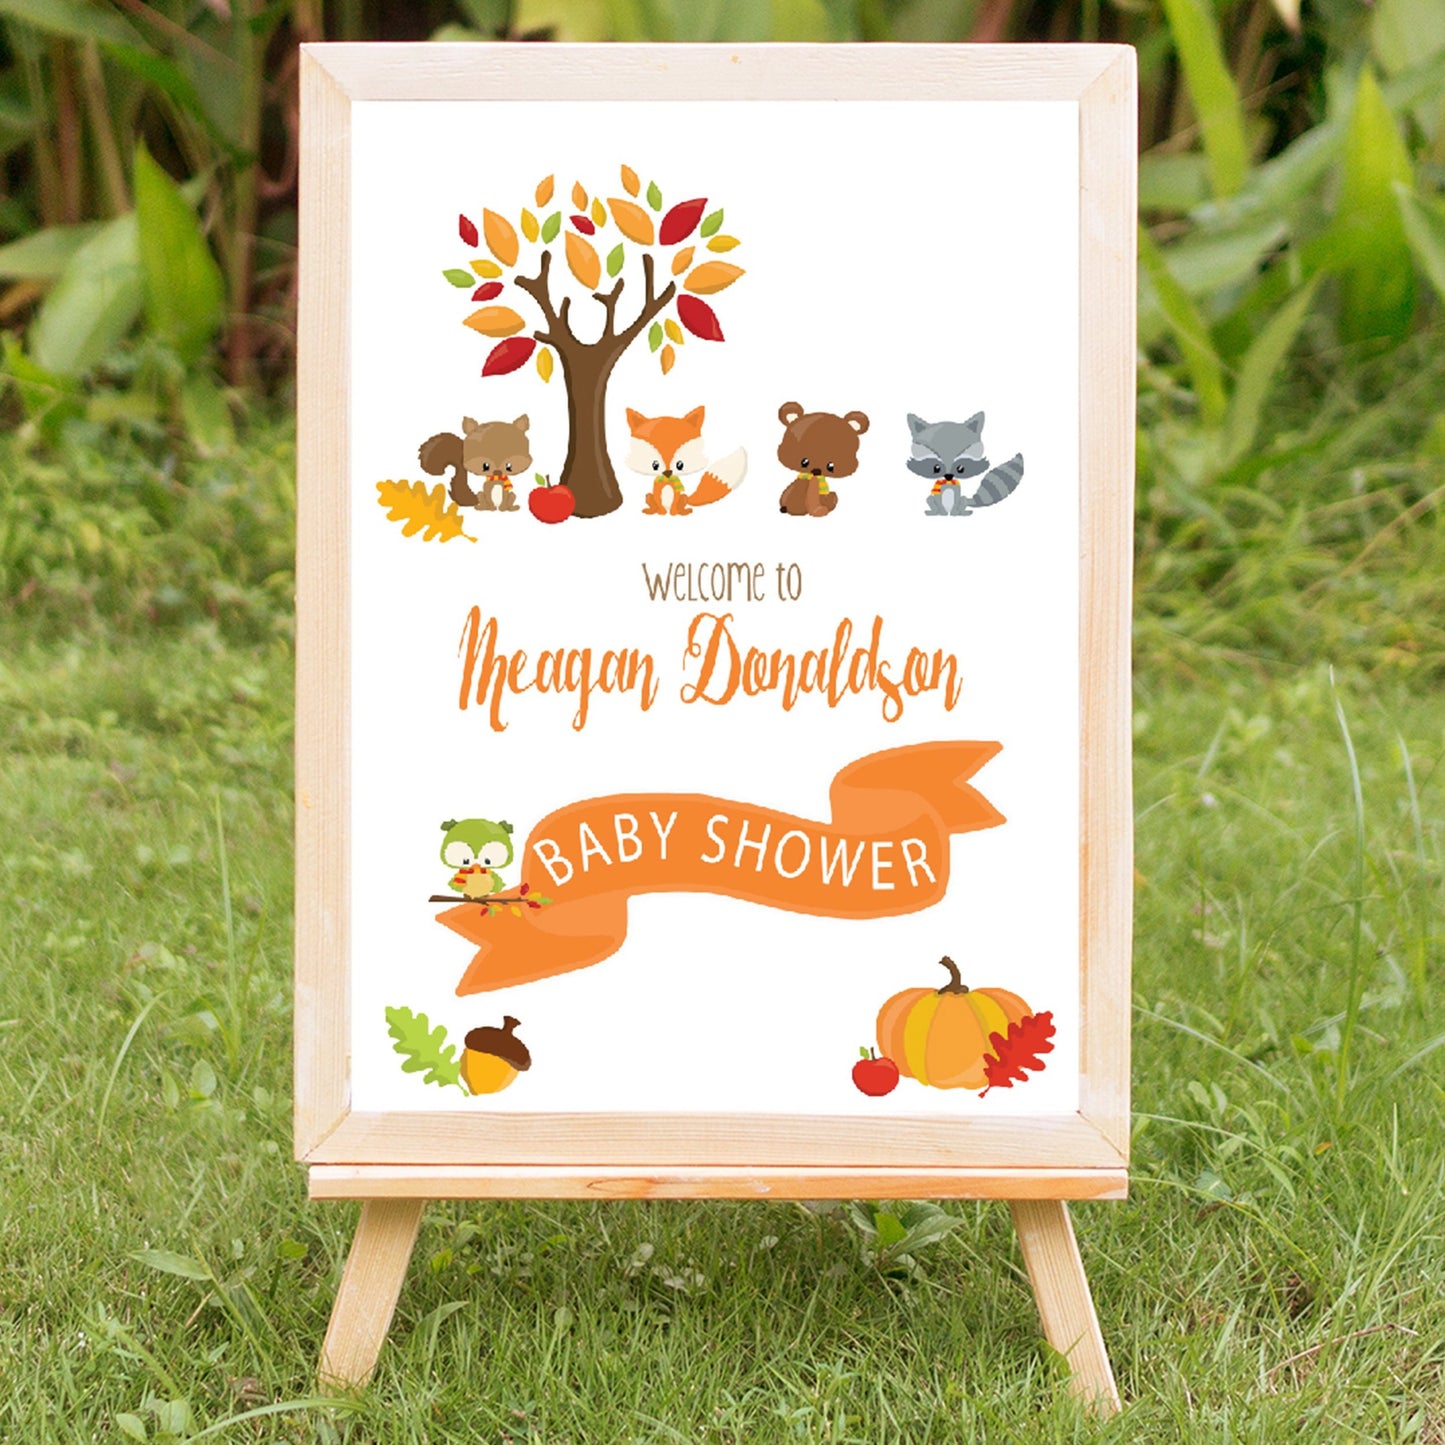 Woodland Friends Baby Shower Welcome Sign - Invitetique